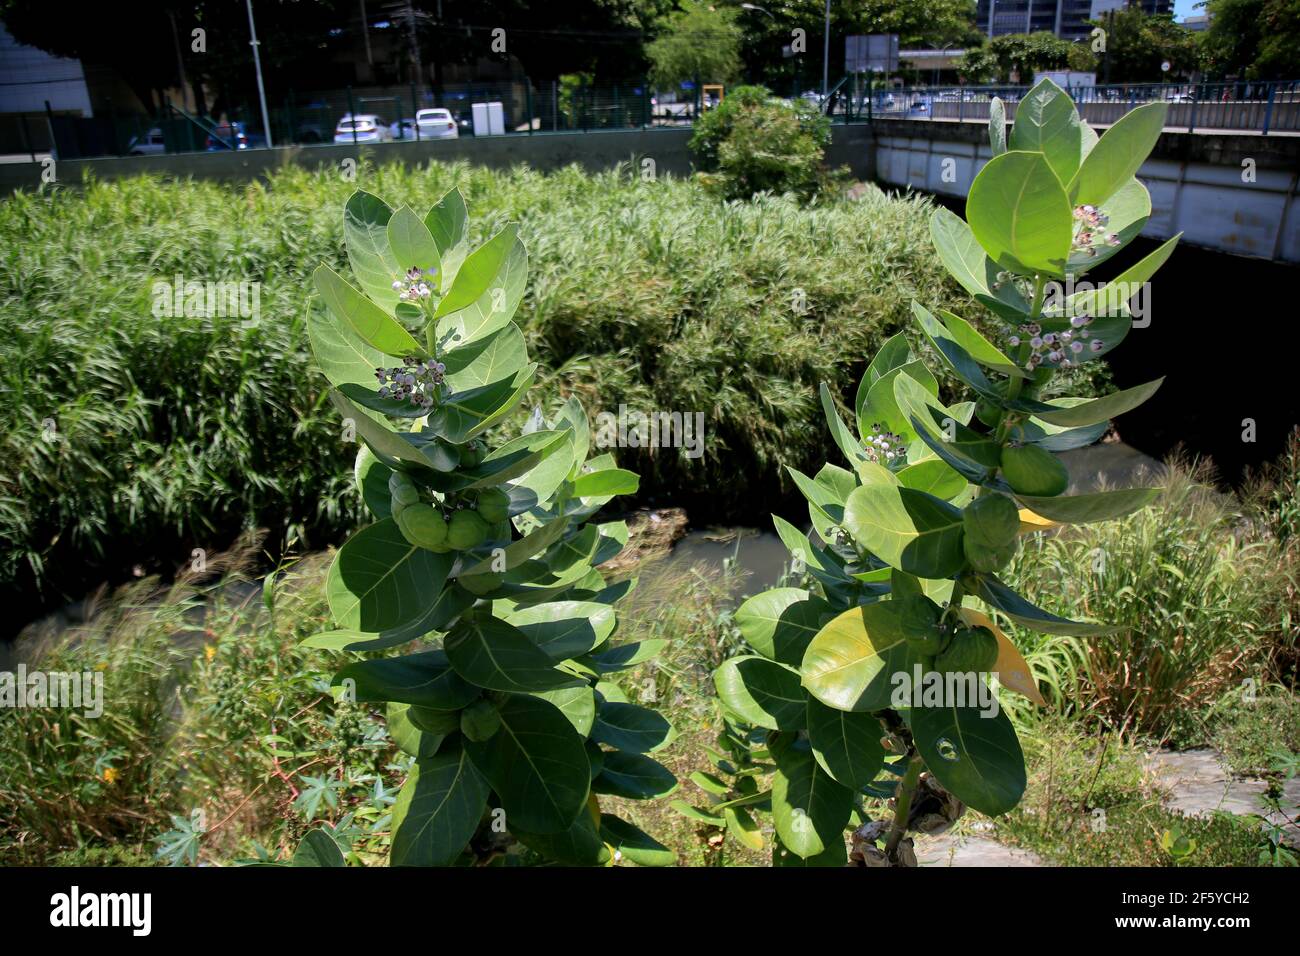 salvador, bahia, brazil - january 25, 2021: calotropis procera plant is  seen in the city of Salvador. The green unripe fruits have a toxic milky sap  Stock Photo - Alamy